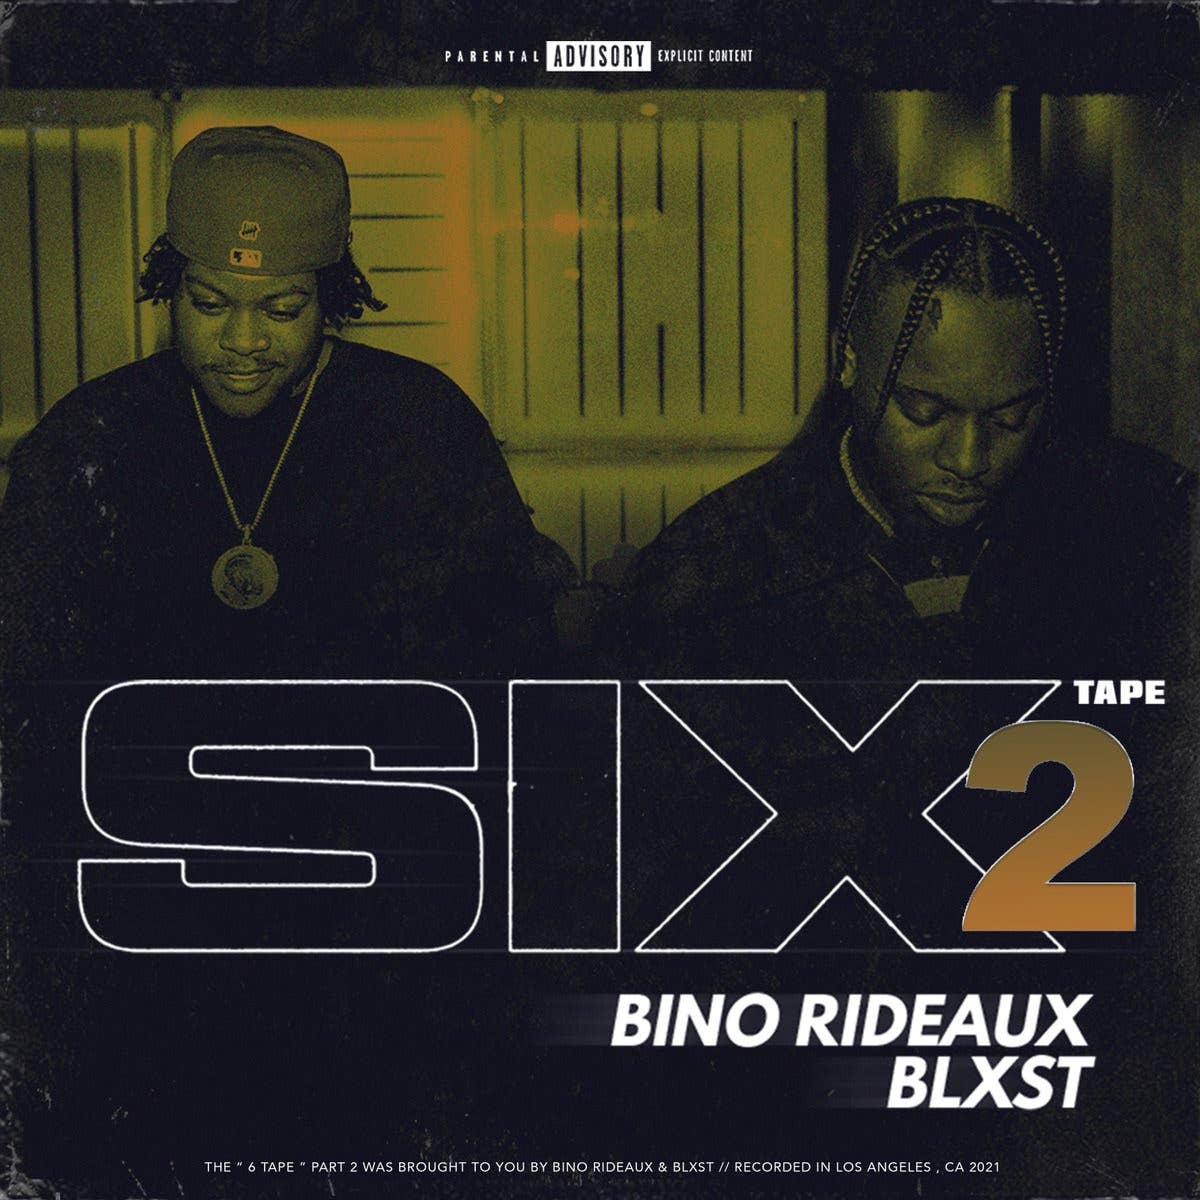 Blxst and Bino Rideaux